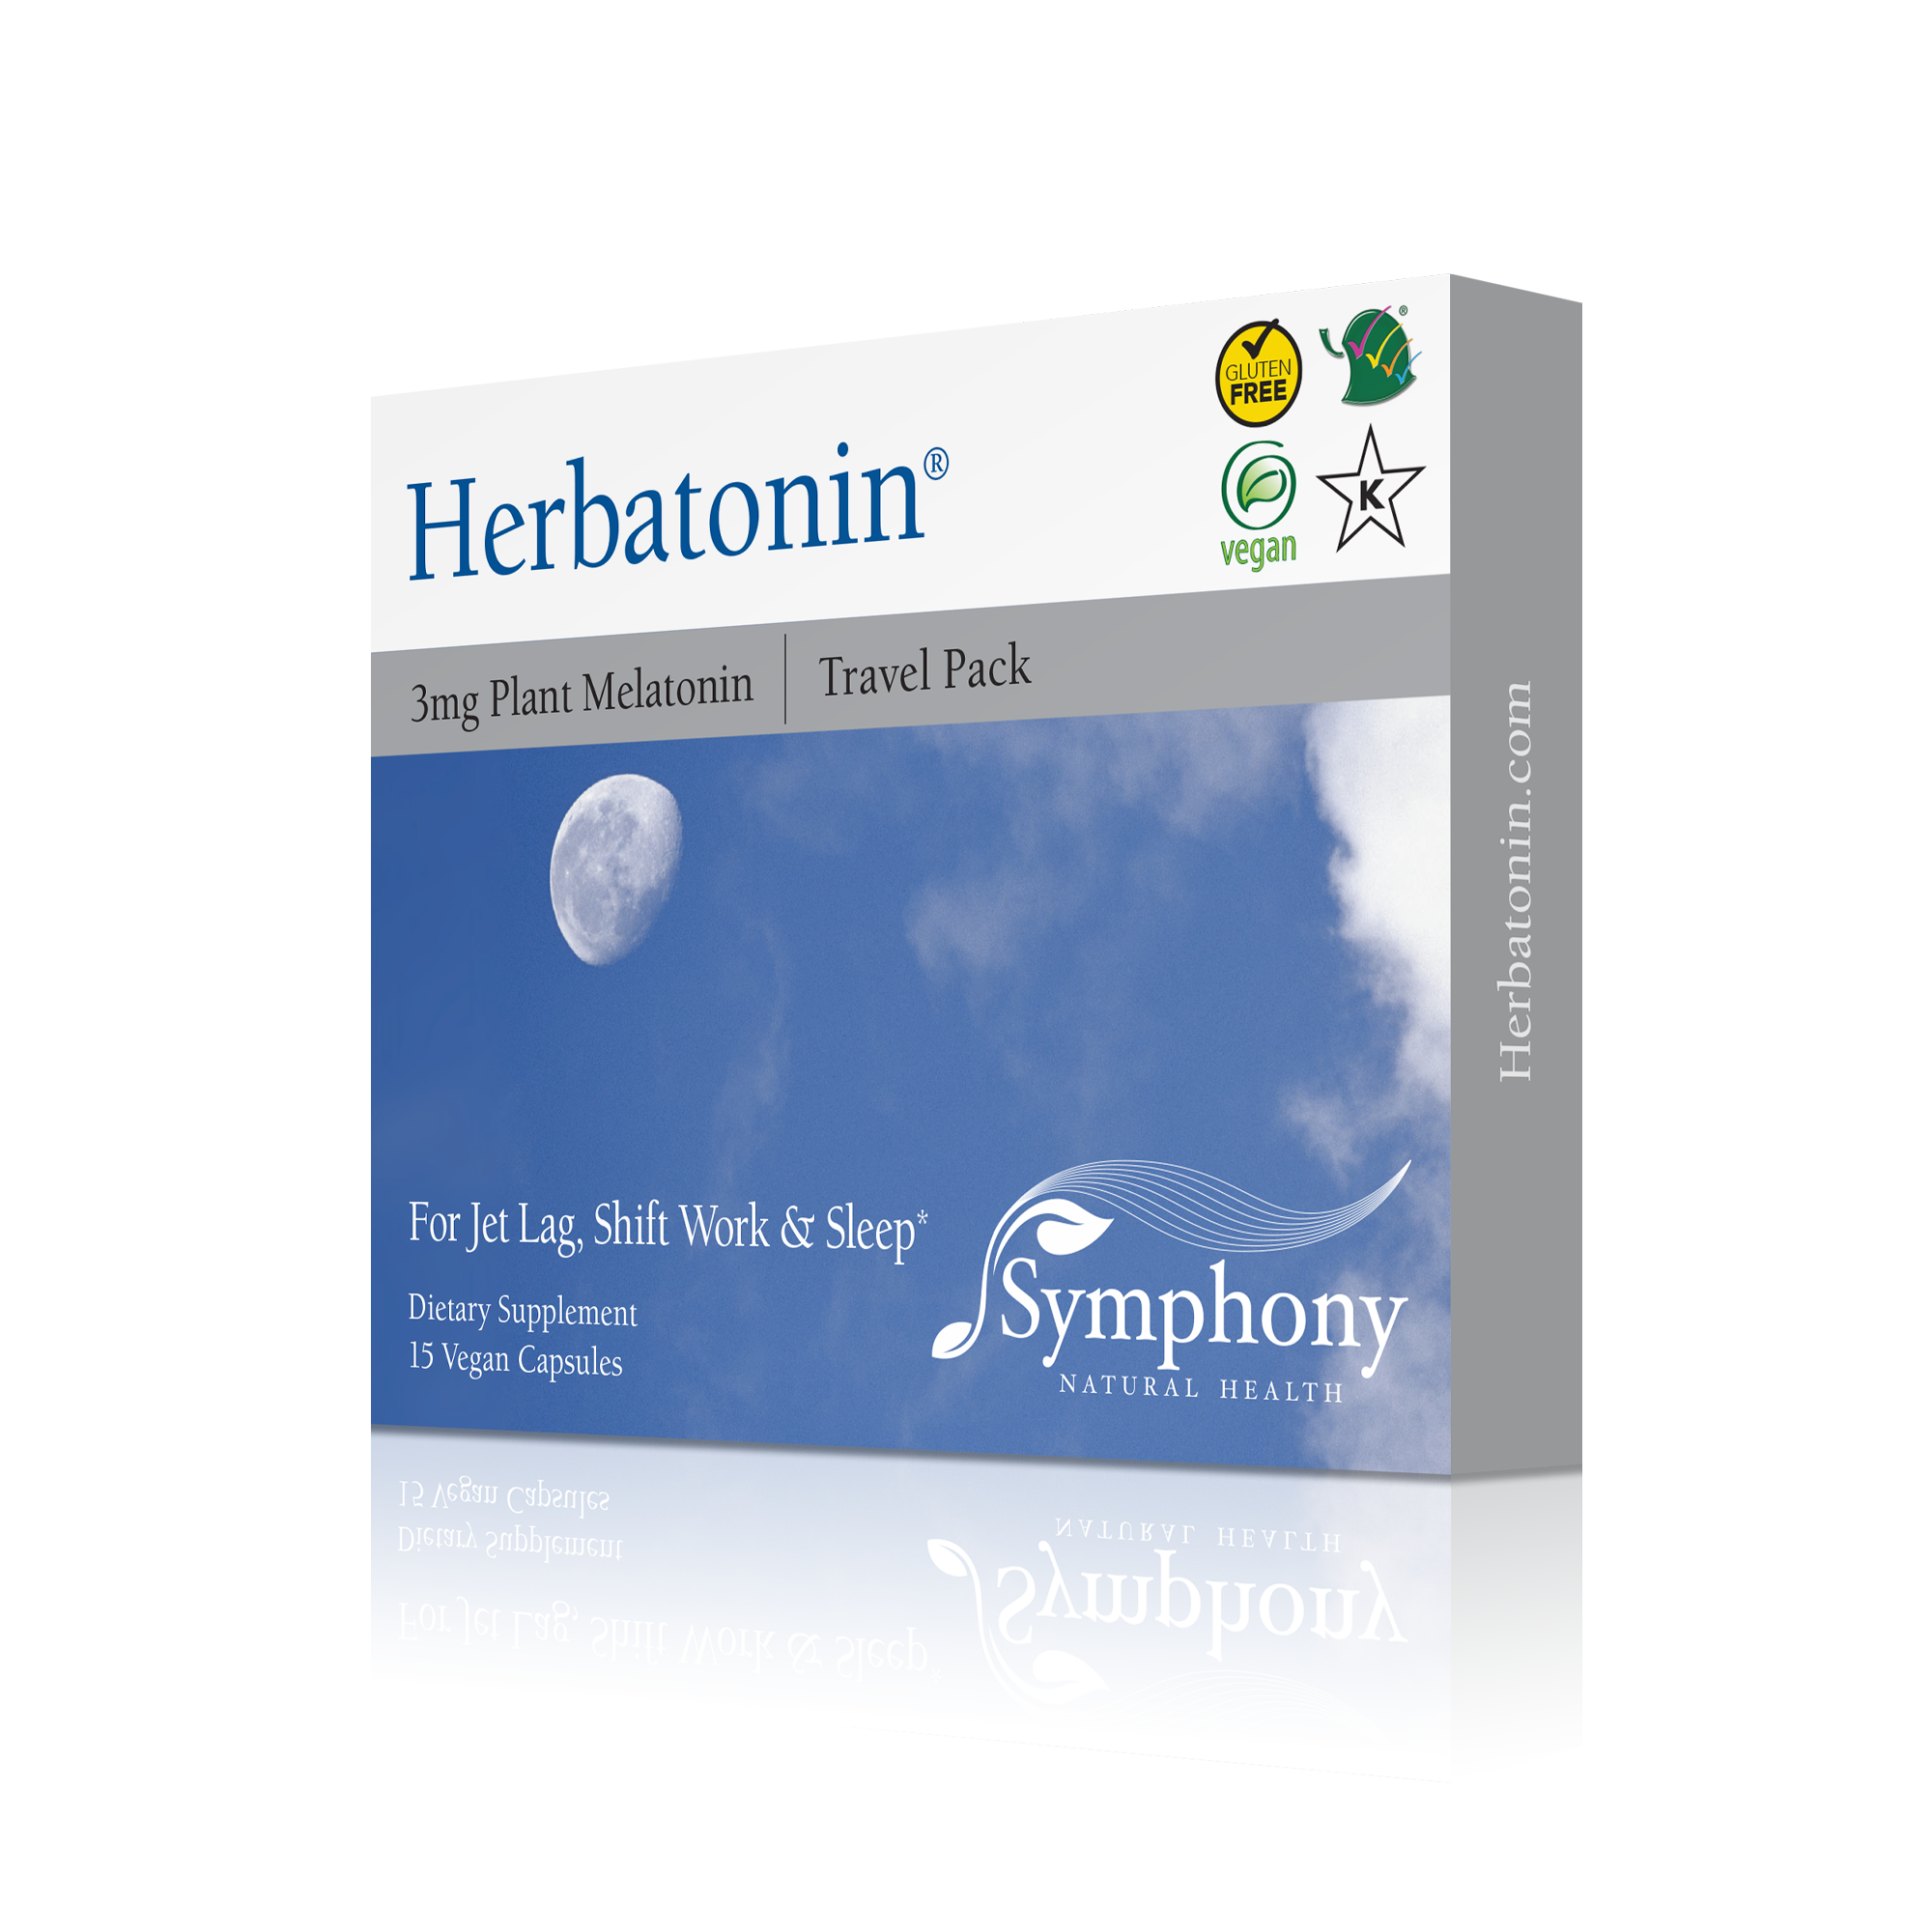 Herbatonin 3mg Travel Pack left-facing front and side of two product boxes Herbatonin blue logo on black background, moon in daylight blue sky and clouds, gluten free, vegan and Kosher logos, symphony logo